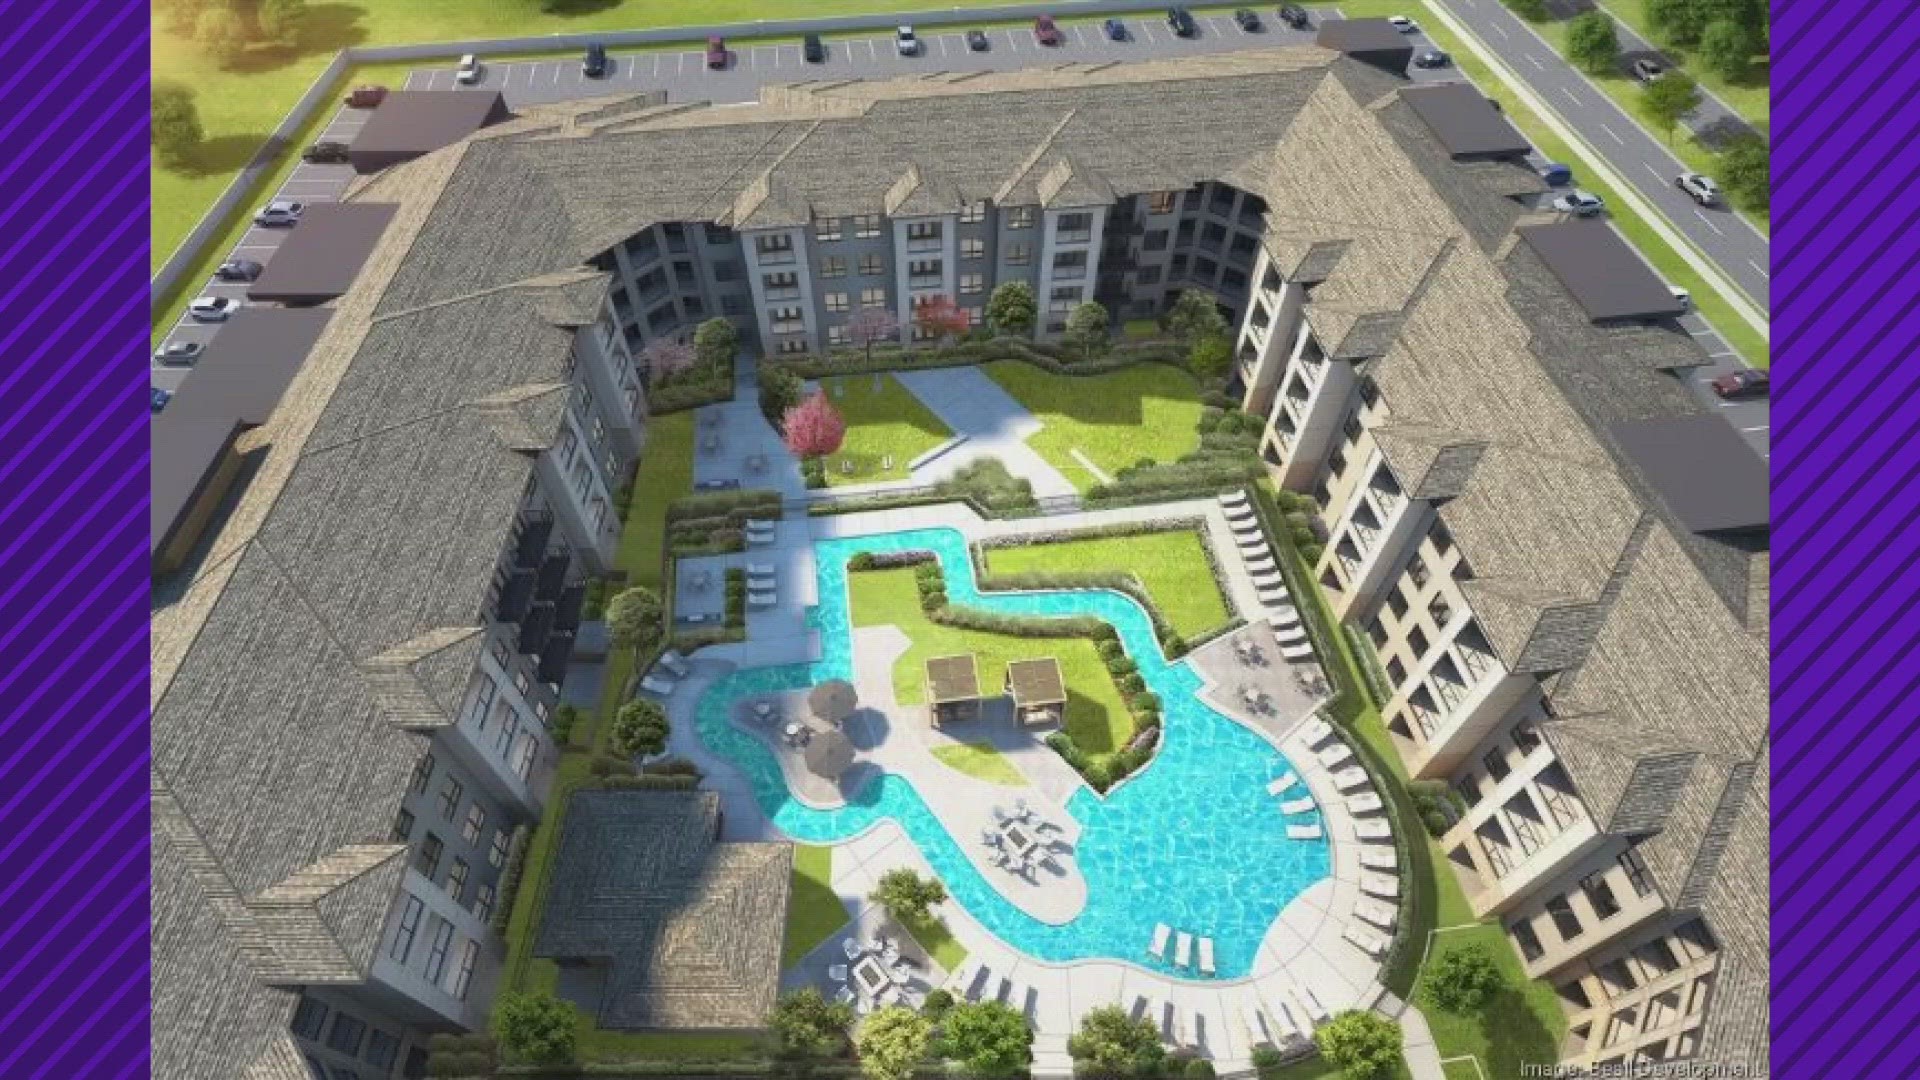 Preliminary site work has started on The Quinn, a 317-unit, four-story apartment complex in the Collin County city.